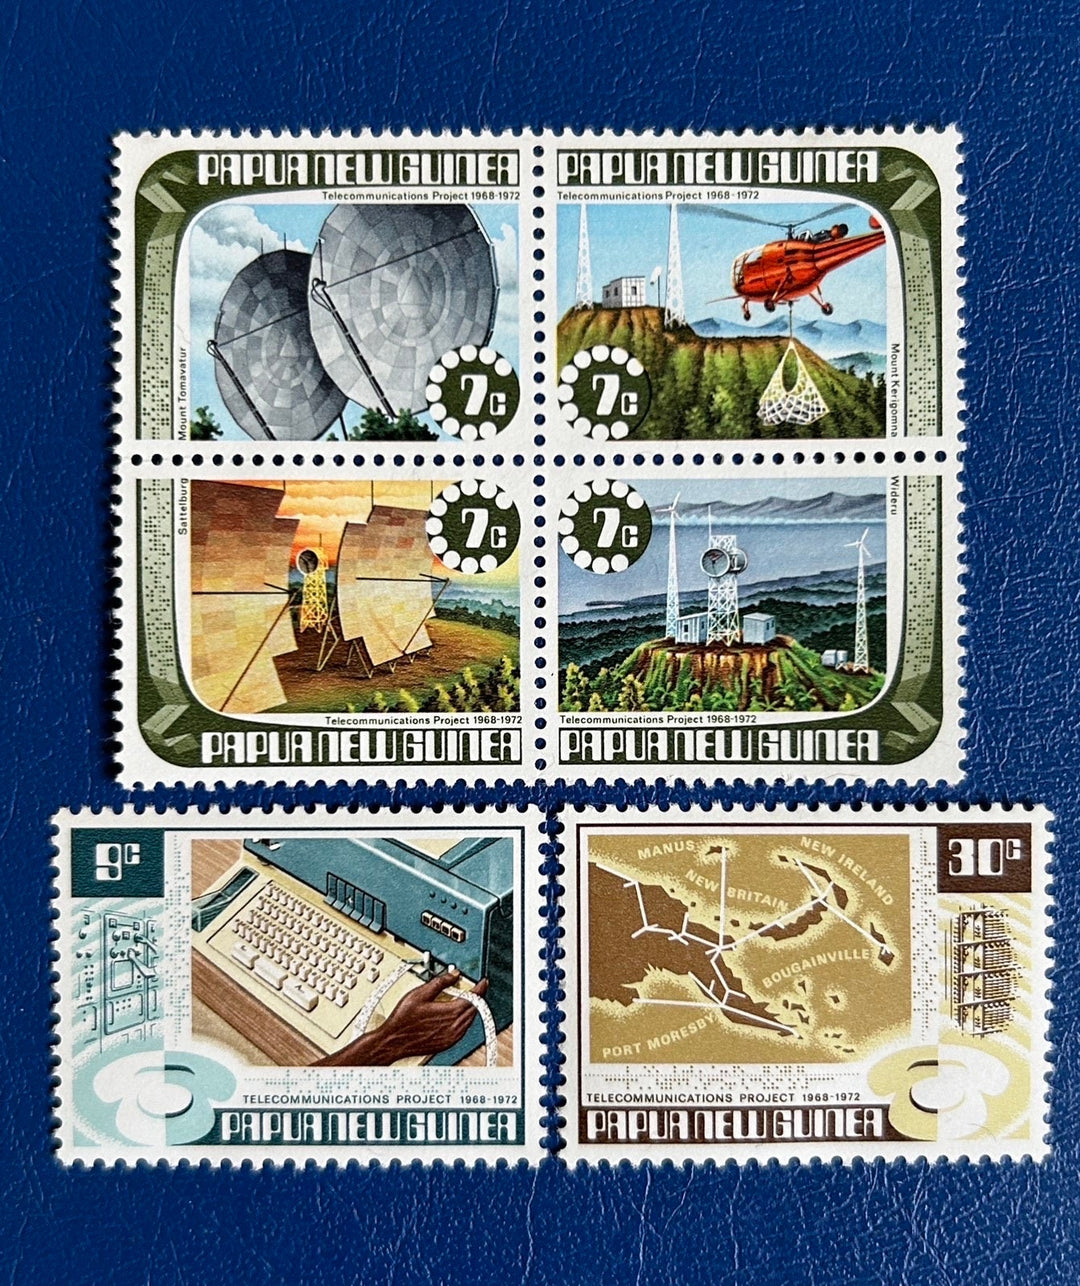 Greece - Original Vintage Postage Stamps- 1973 - Telecommunications - for the collector, artist or crafter